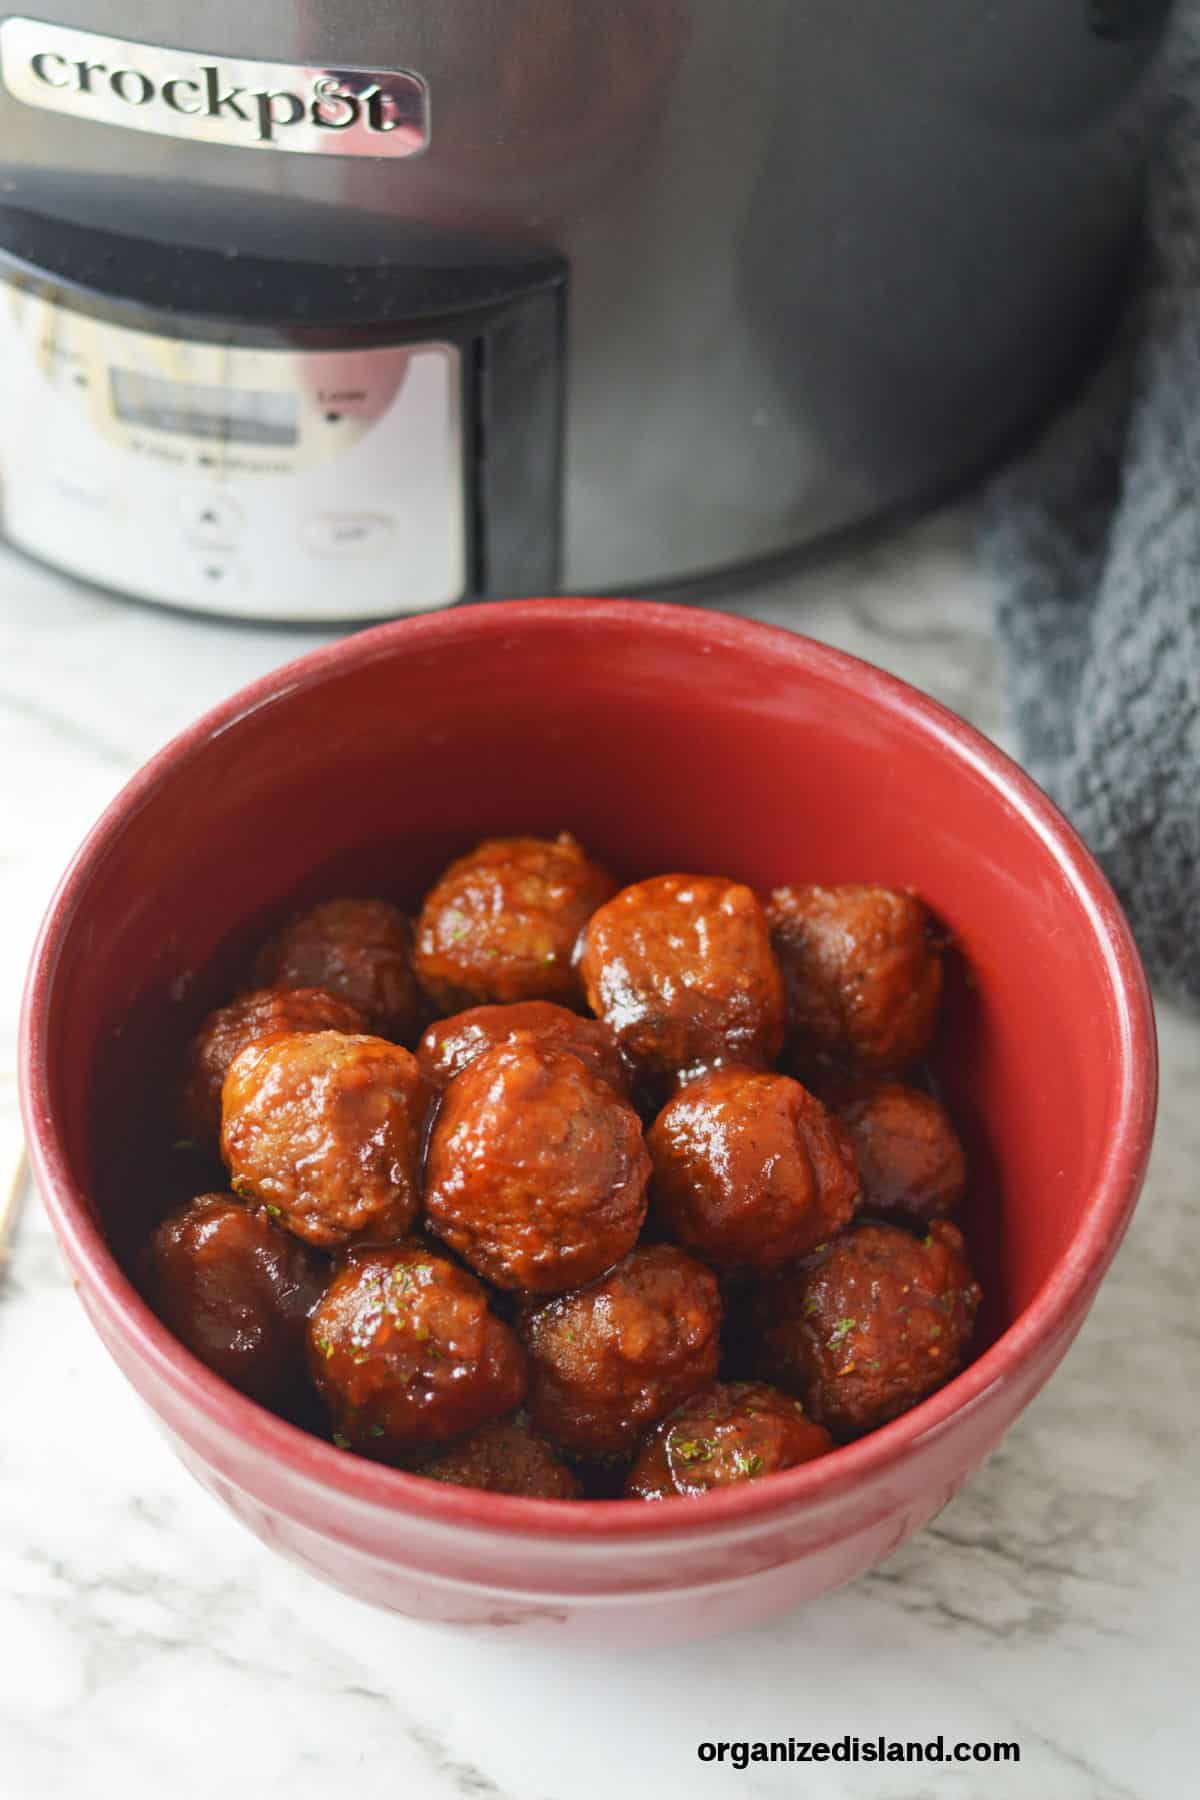 Slow cooker Slow cooker Cranberry Sauce Meatballs in bowl with slow cooker.